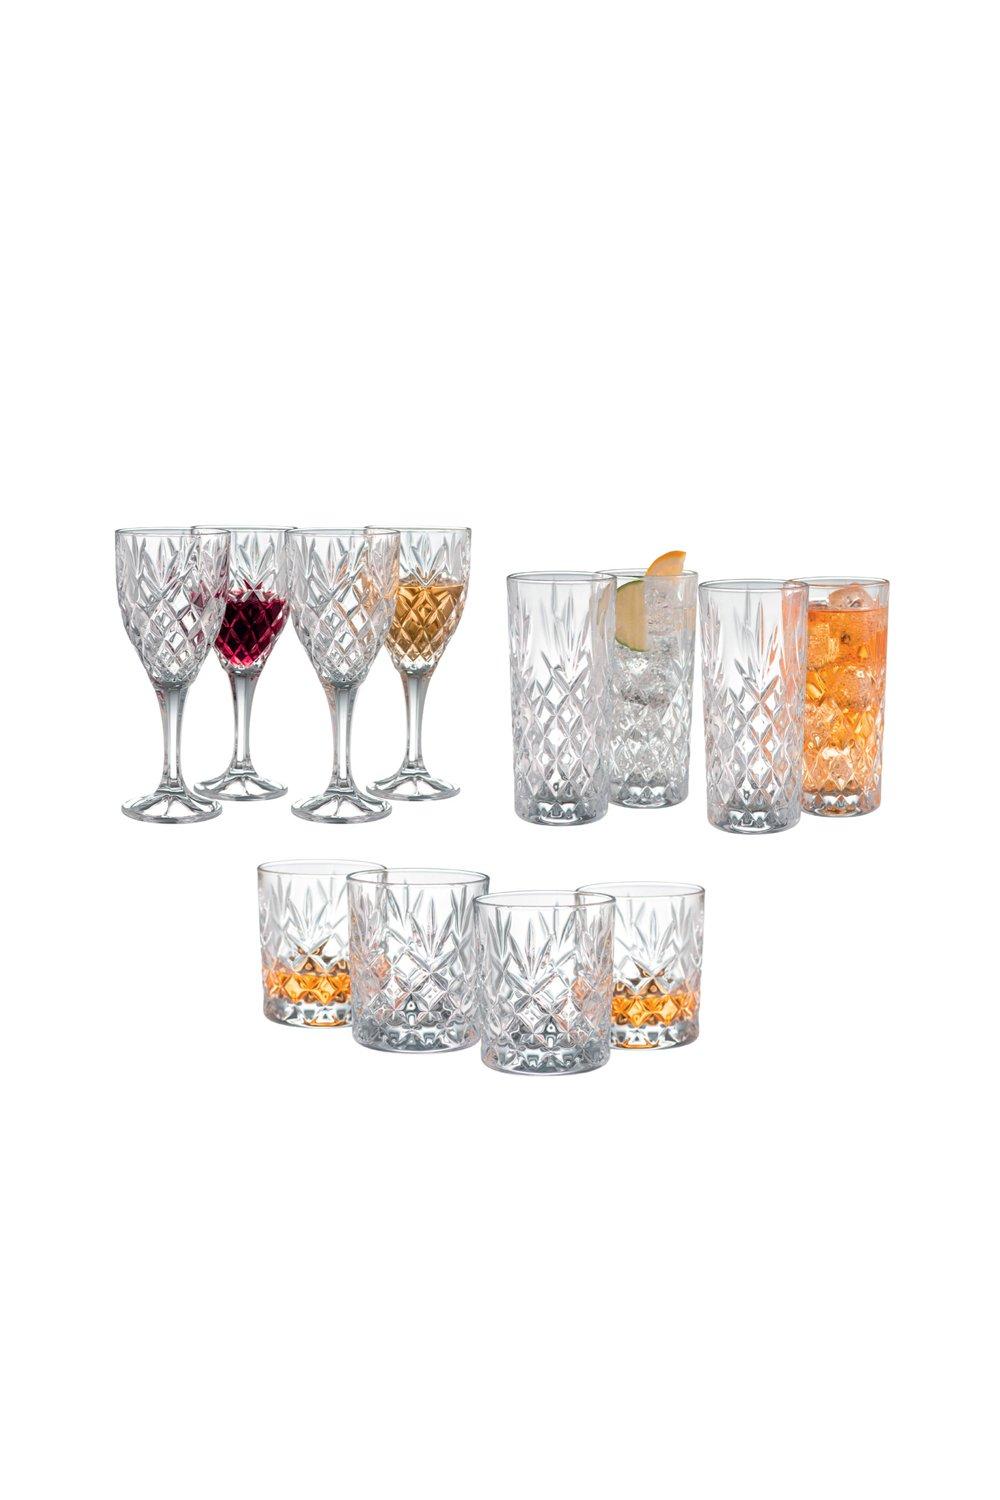 Galway Crystal Renmore Wine Goblets Set of 6